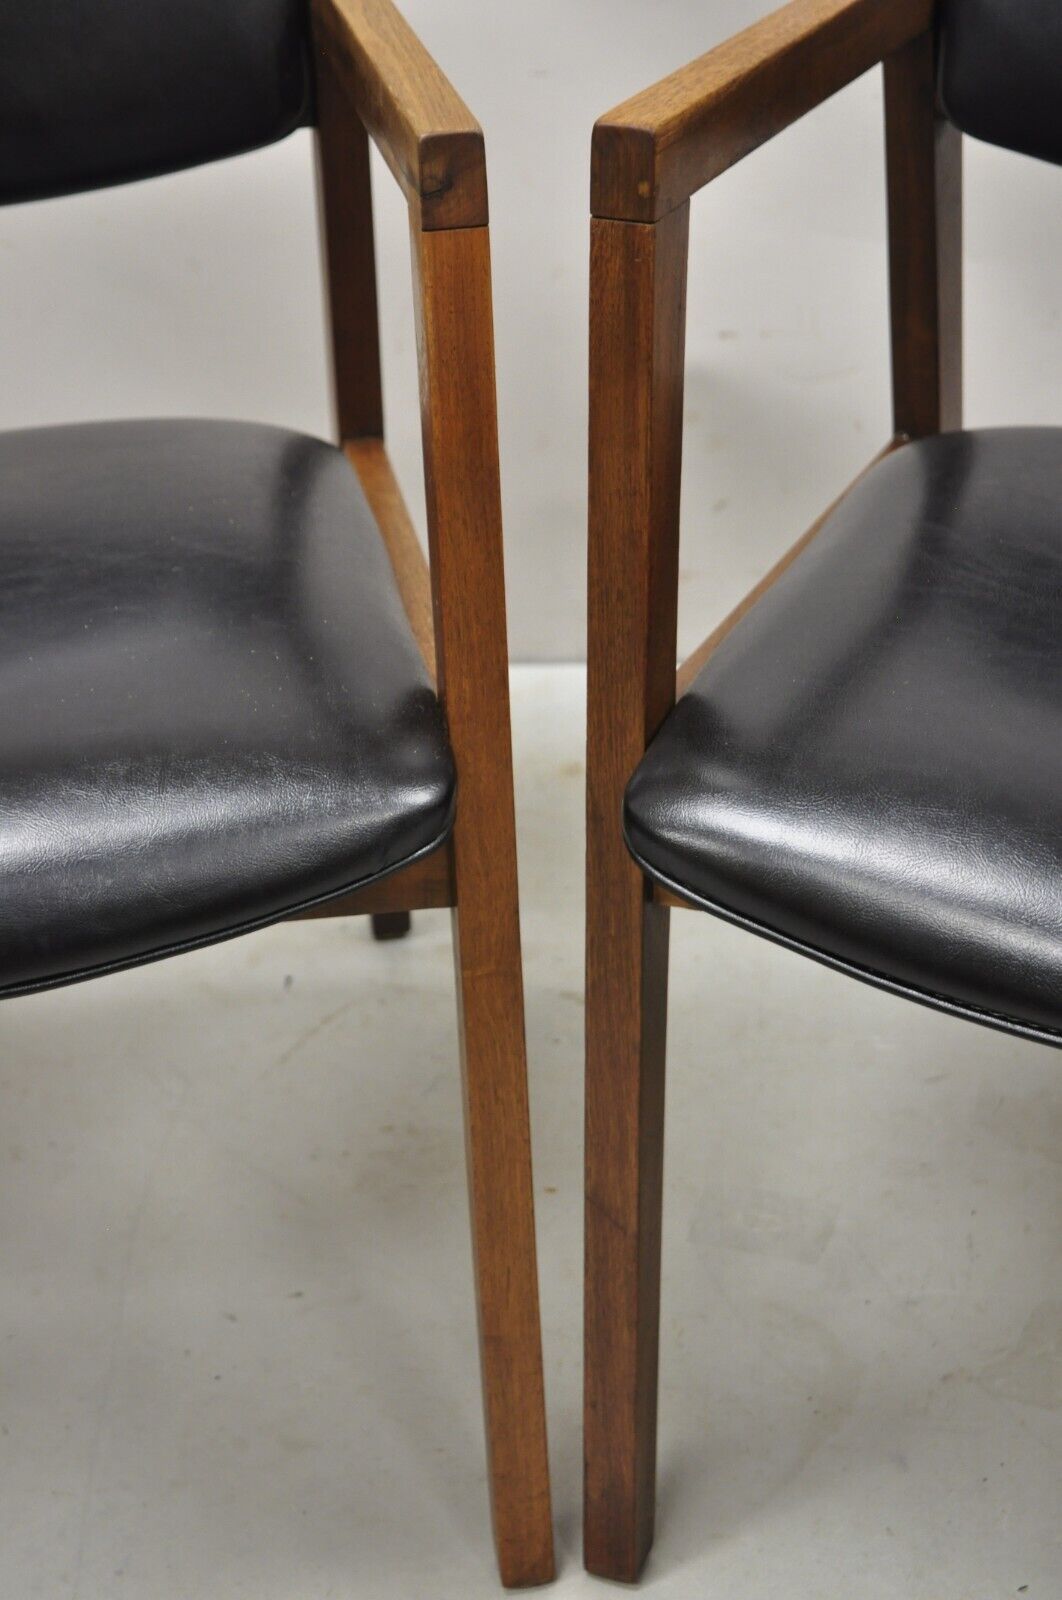 Pair Vintage Mid Century Modern Walnut Arm Chair Lounge Chair by United Chair Co